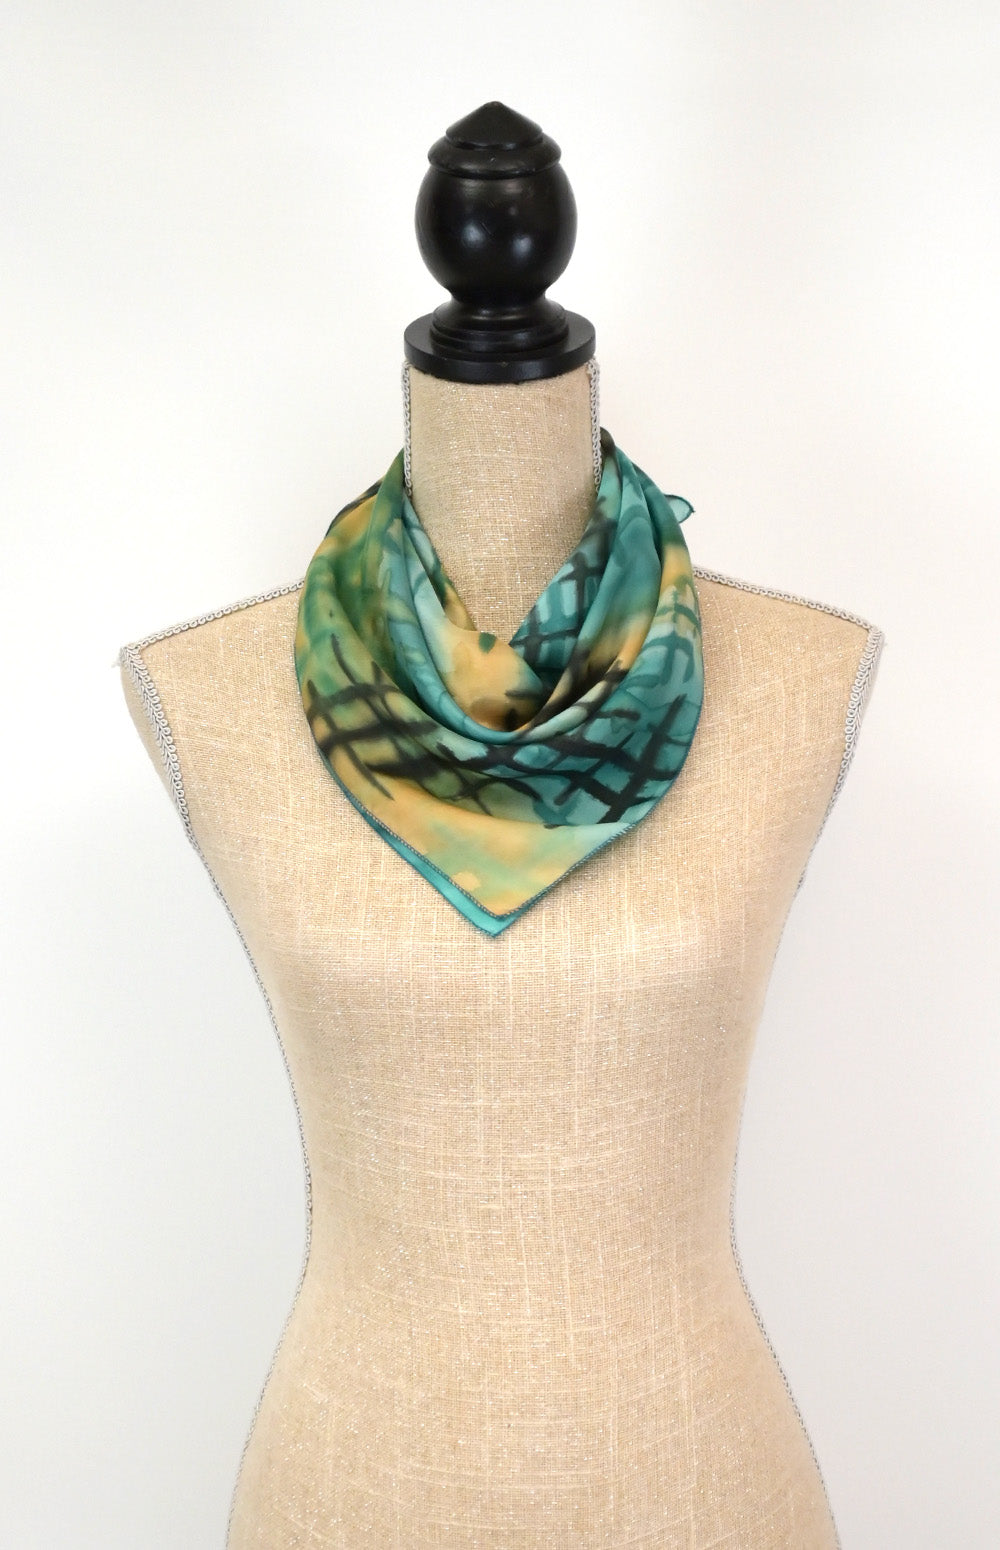 Hand-Painted Silk Scarves, Garments, and Artwork